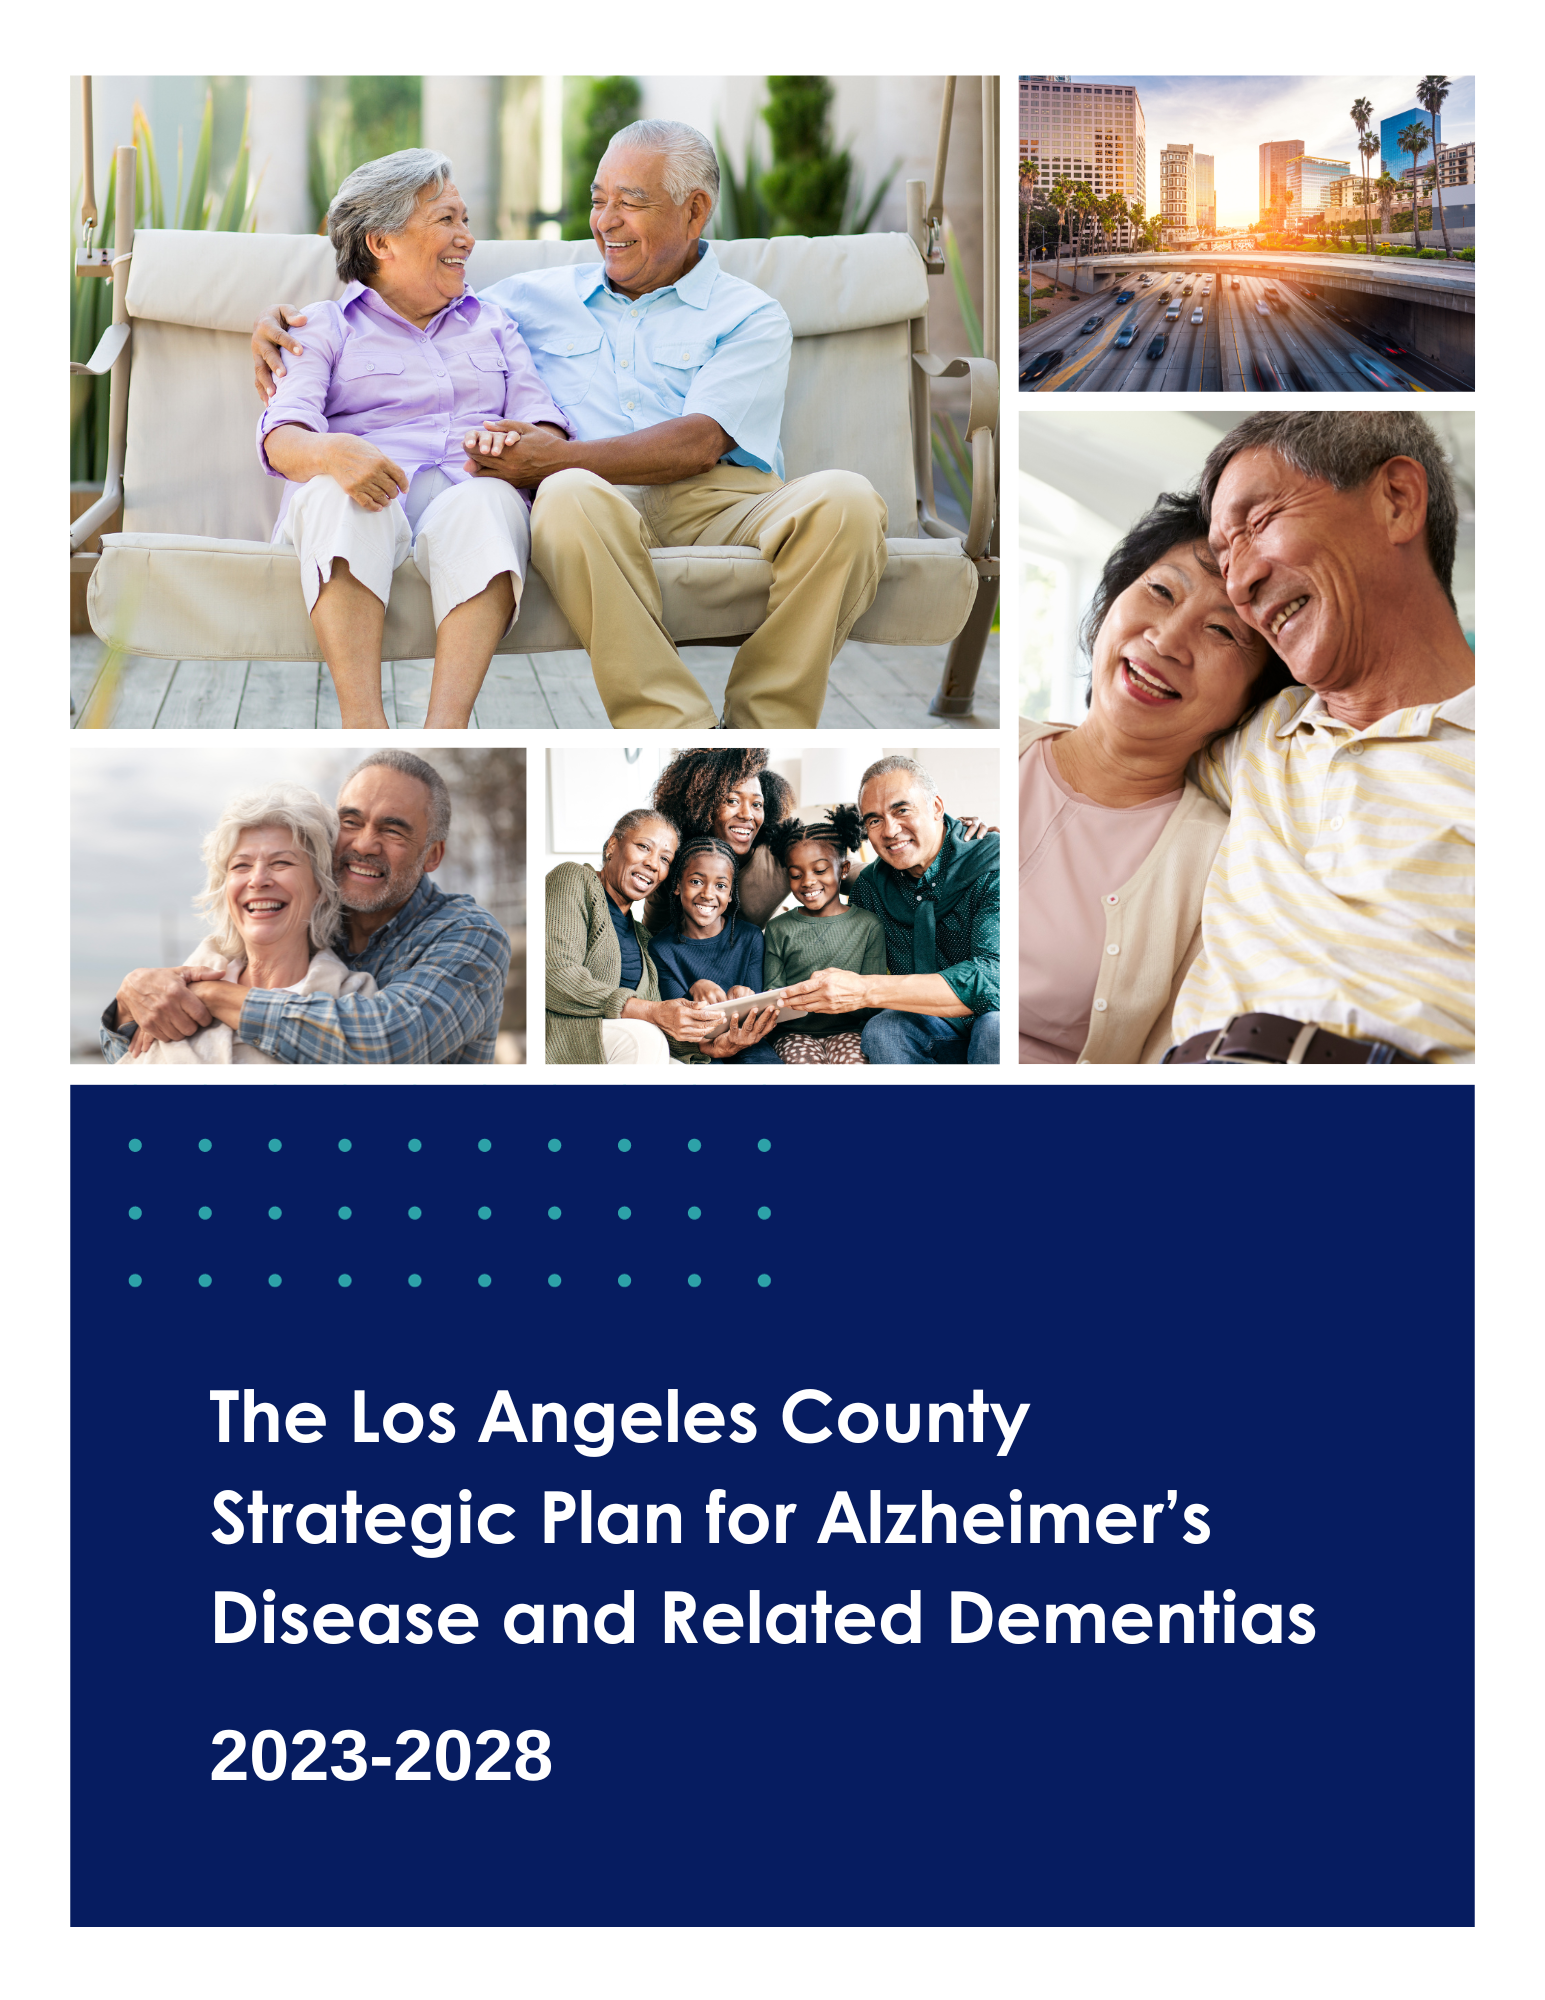 Cover image of The Los Angeles County Strategic Plan for Alzheimer's Disease and Related Dementias, 2023-2028